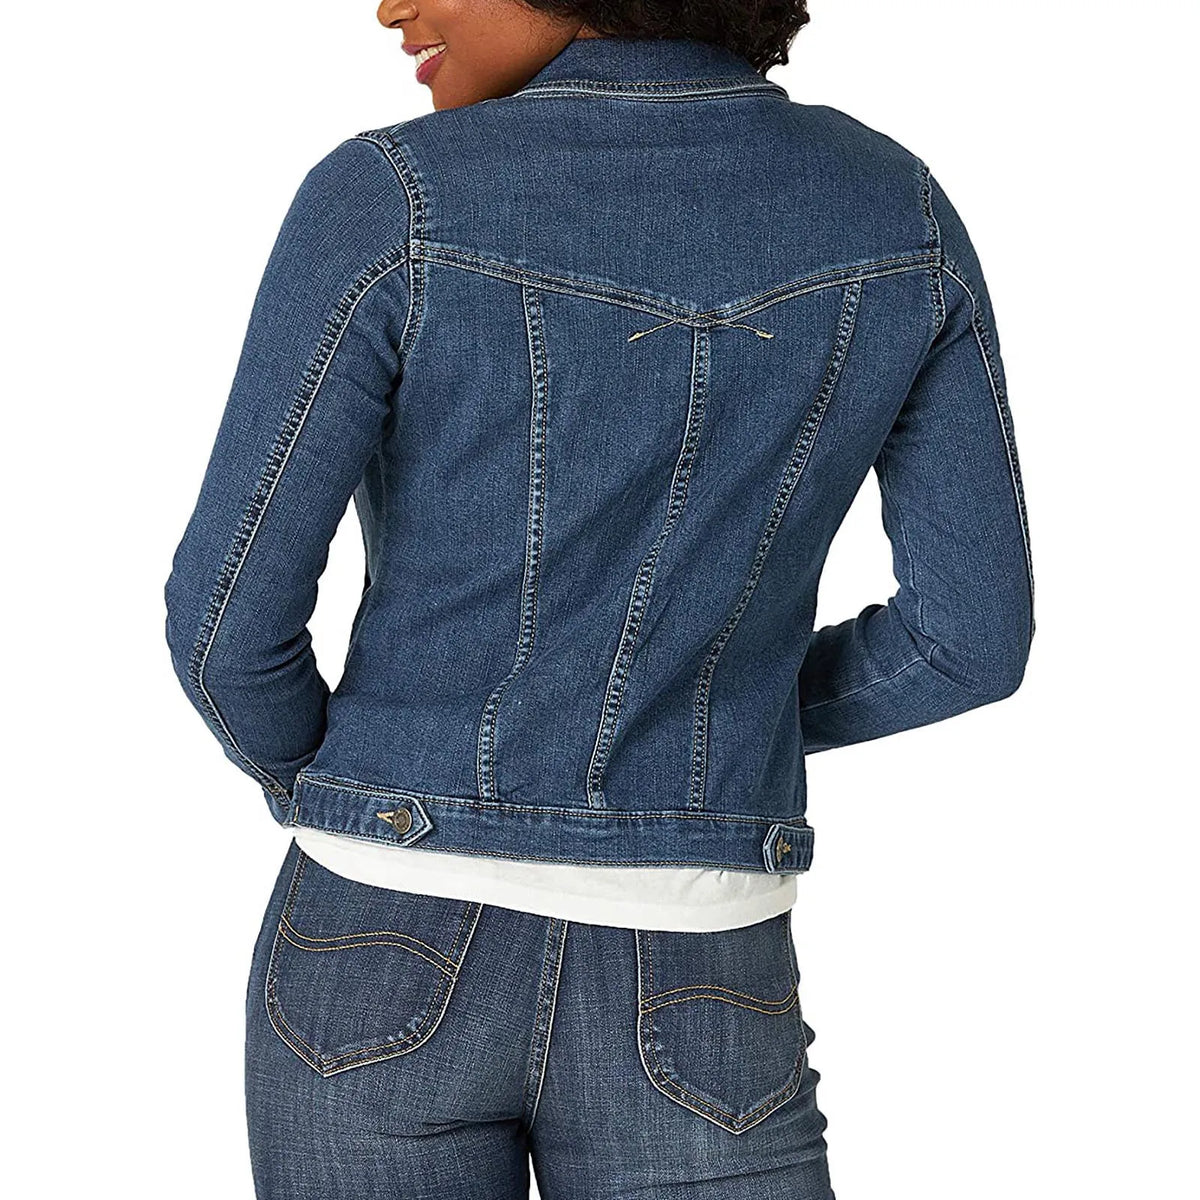 Country Blues Wasit Length Cotton Womens Denim Jacket